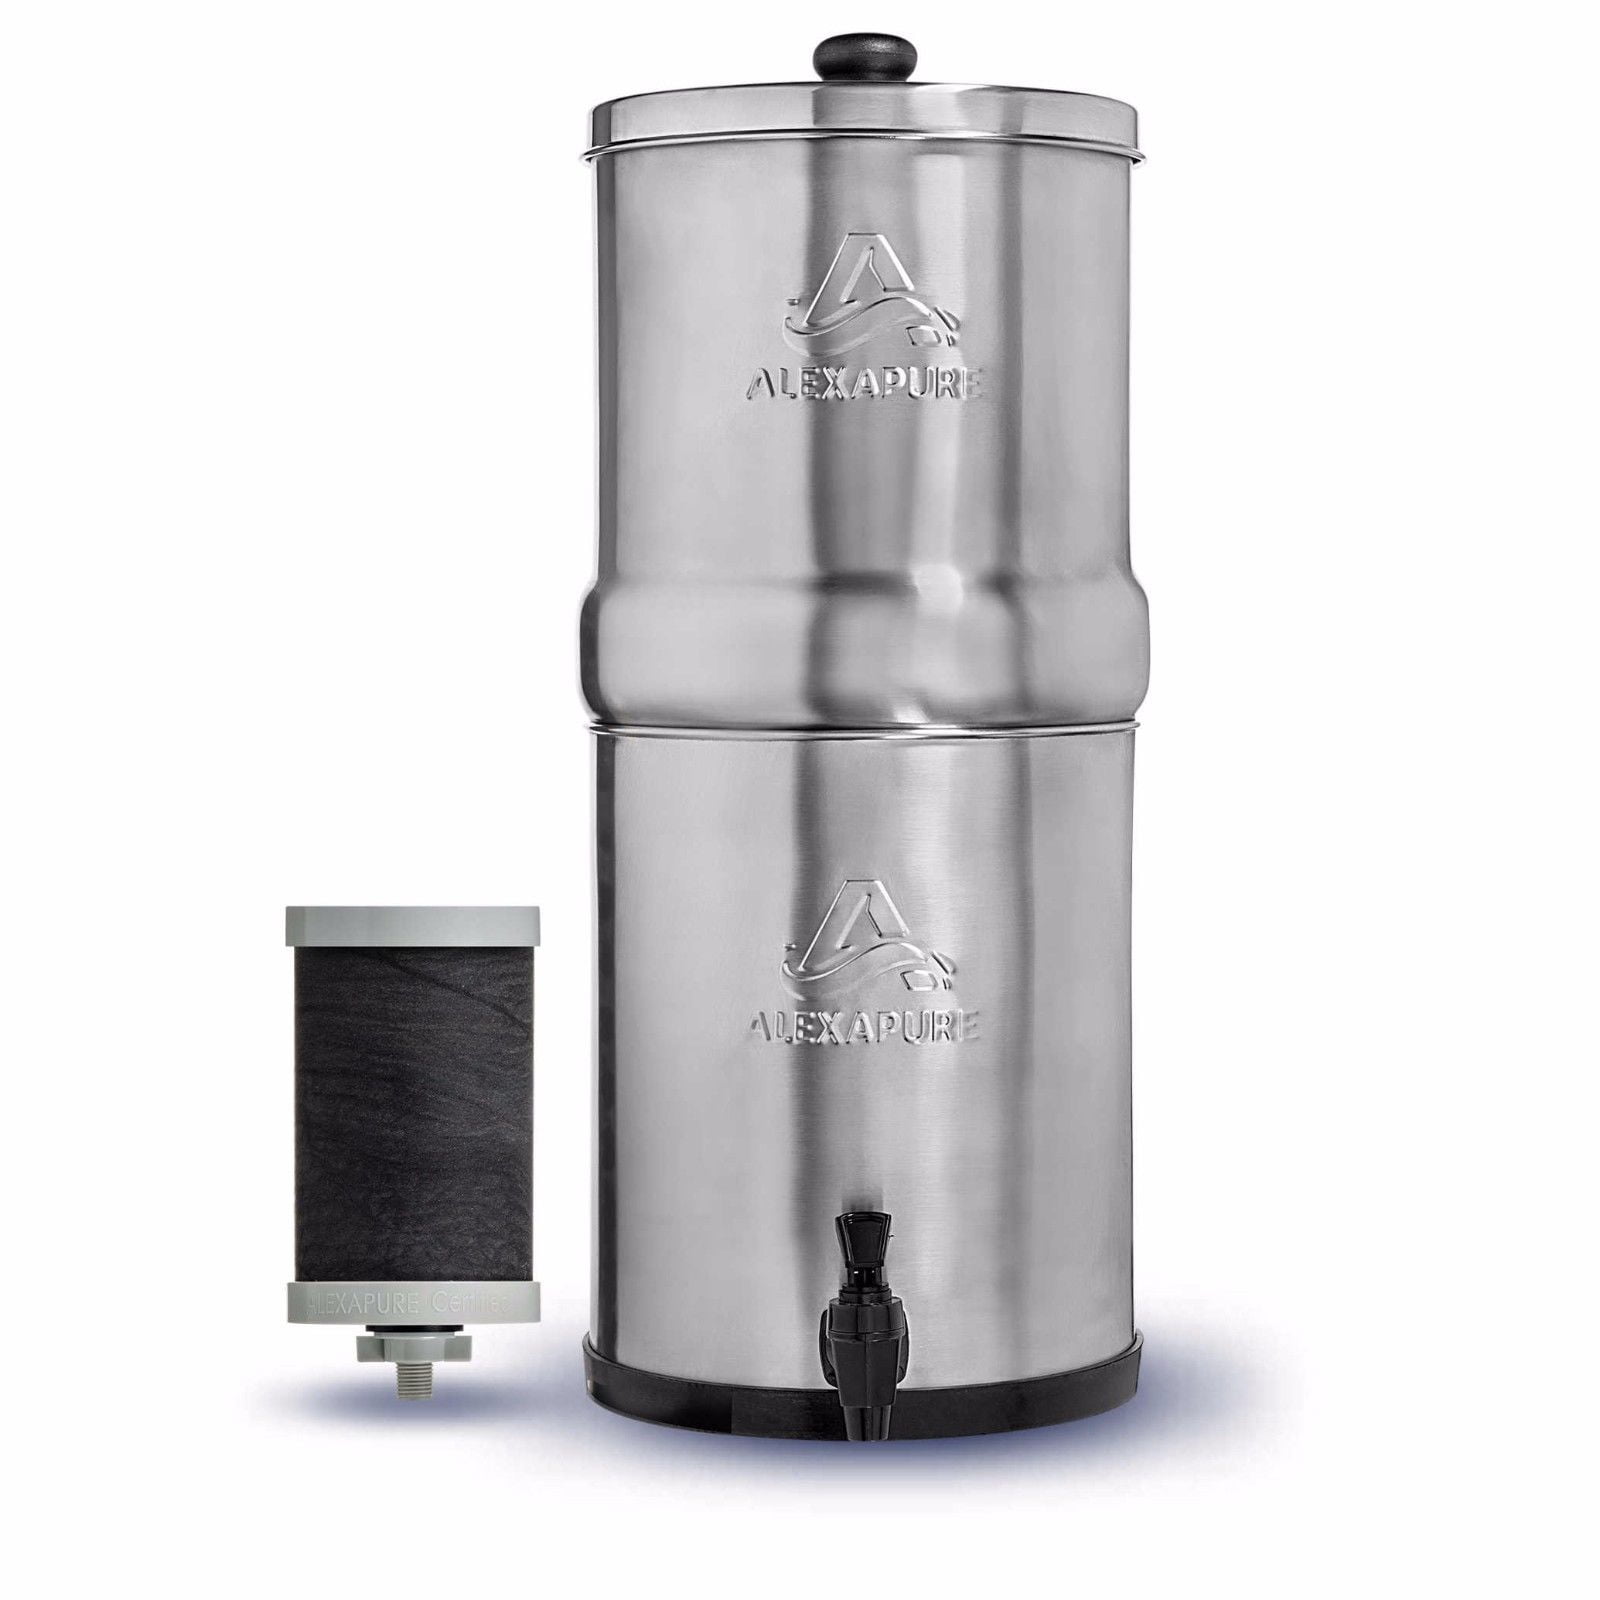 Alexapure Pro Stainless Steel Water Filter Filtration System NEW